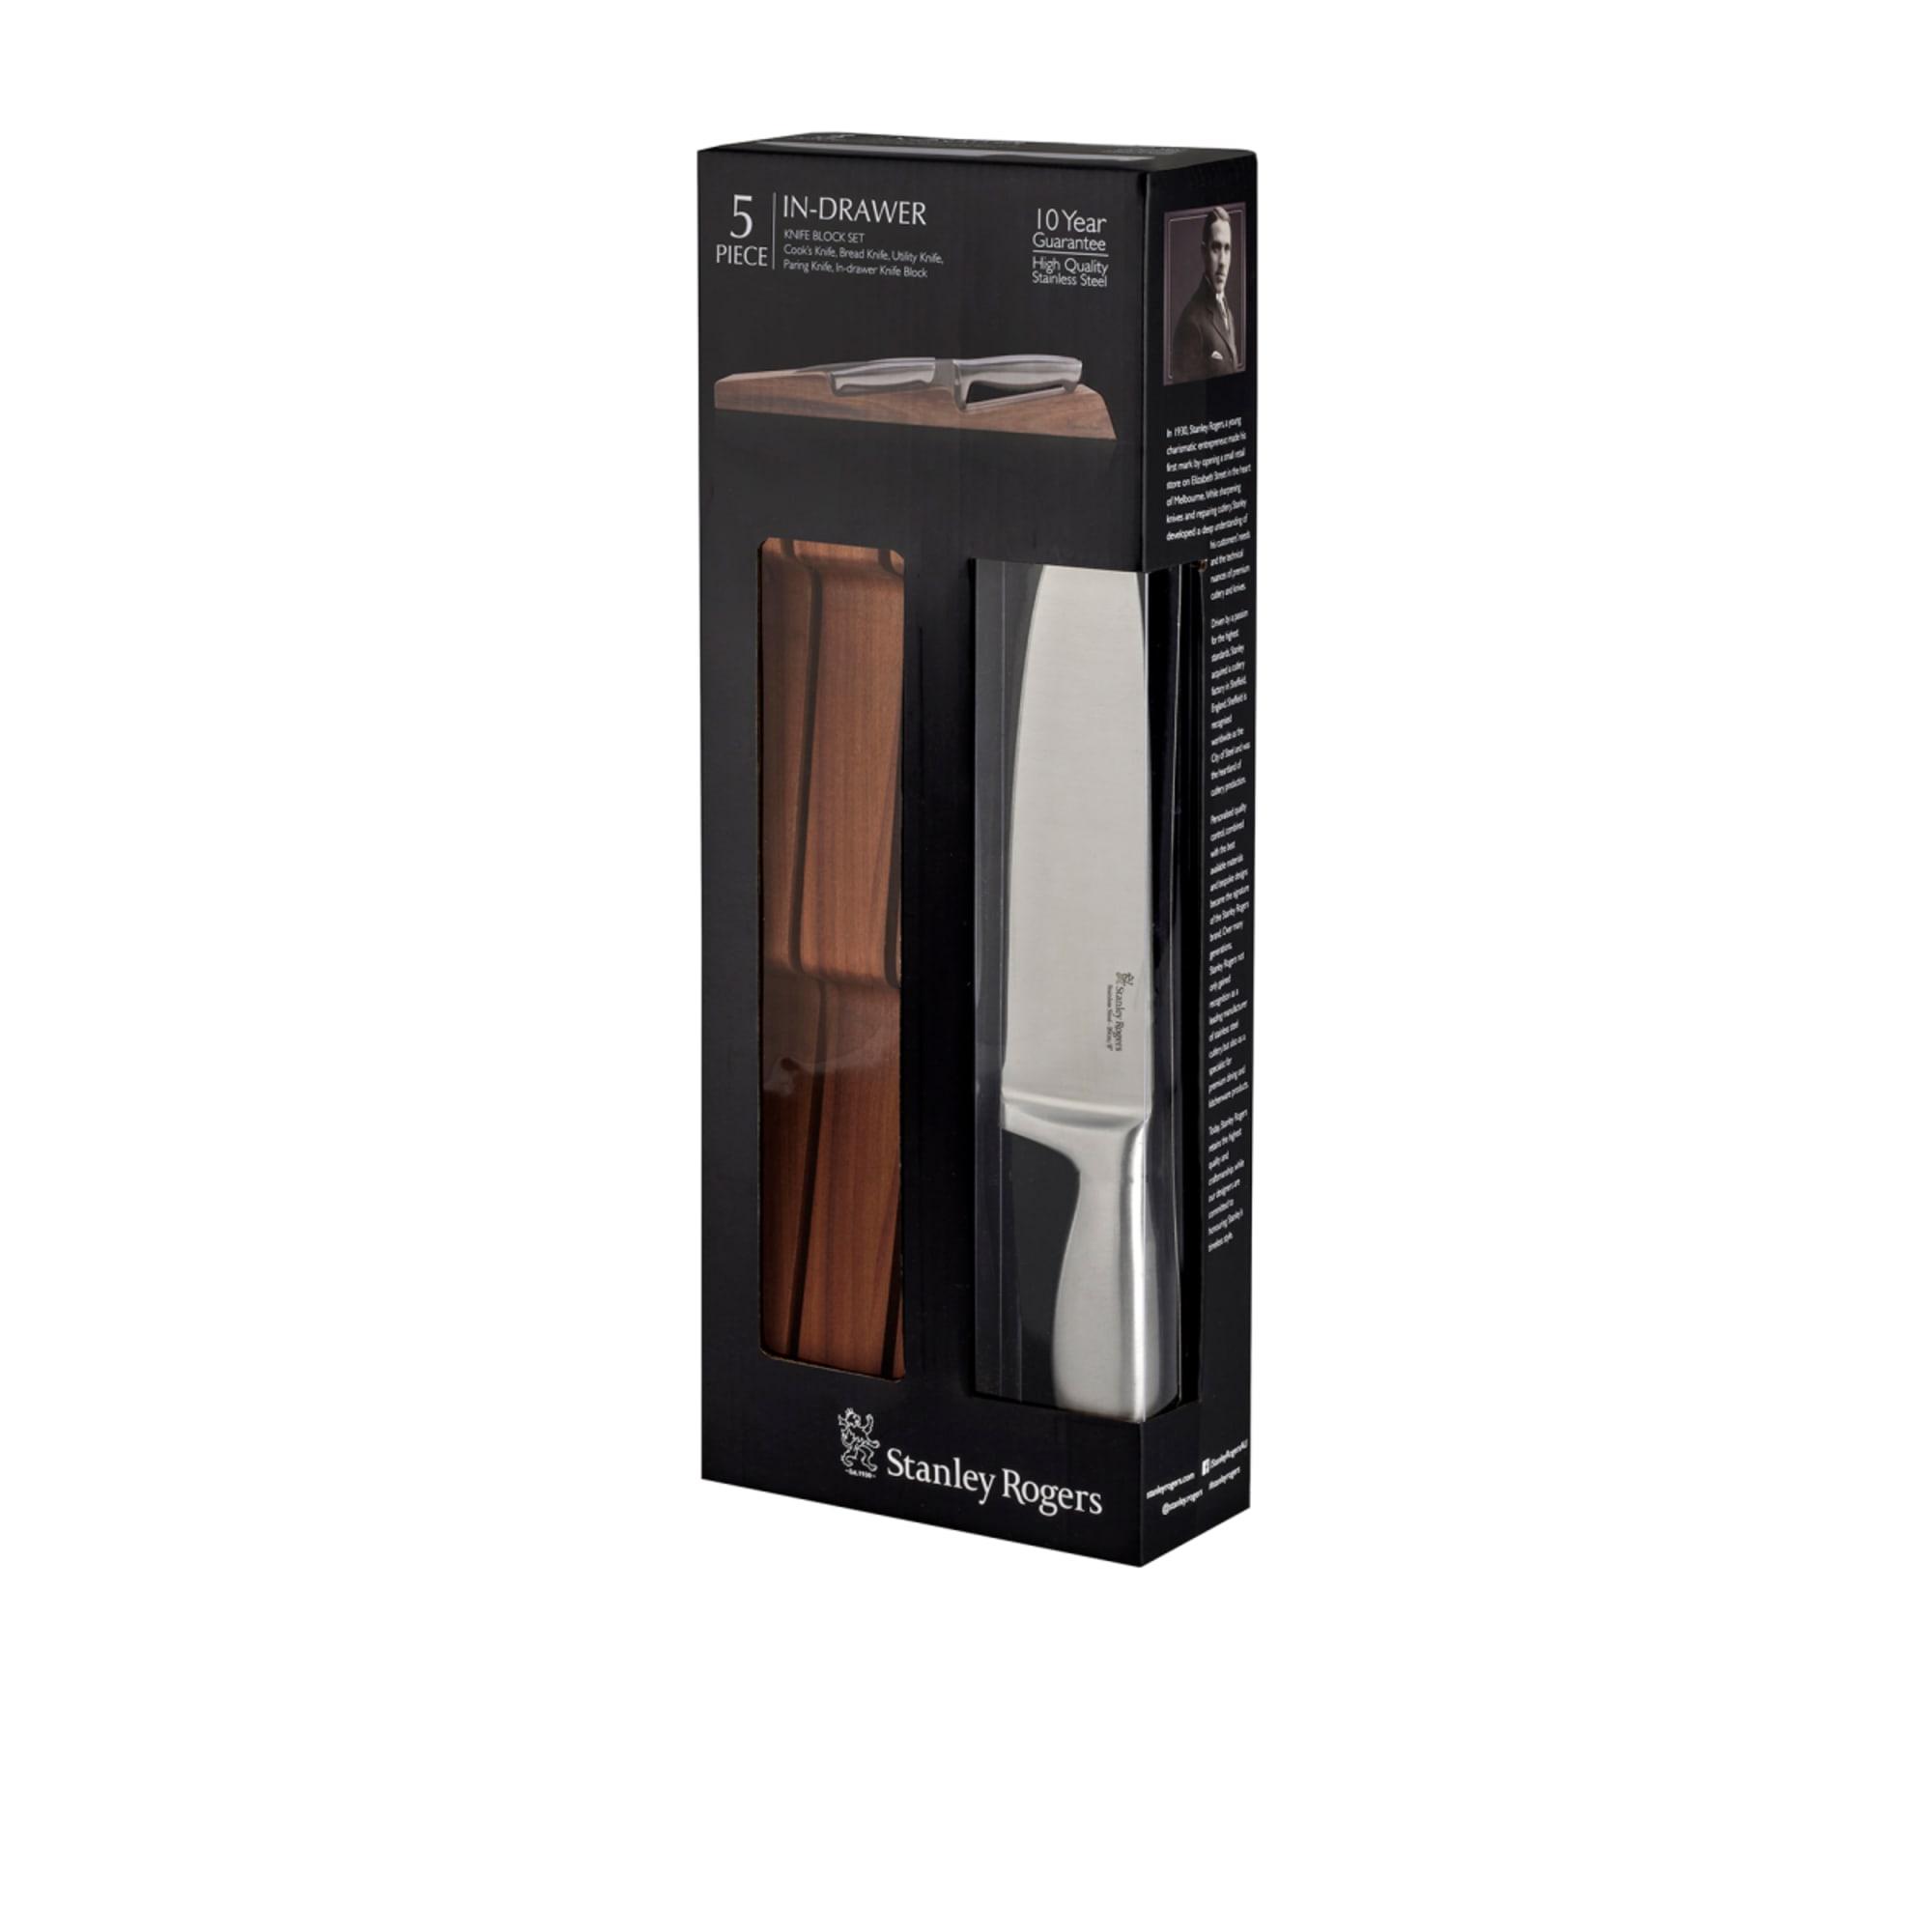 Stanley Rogers 5pc In-Drawer Knife Block Set Image 6